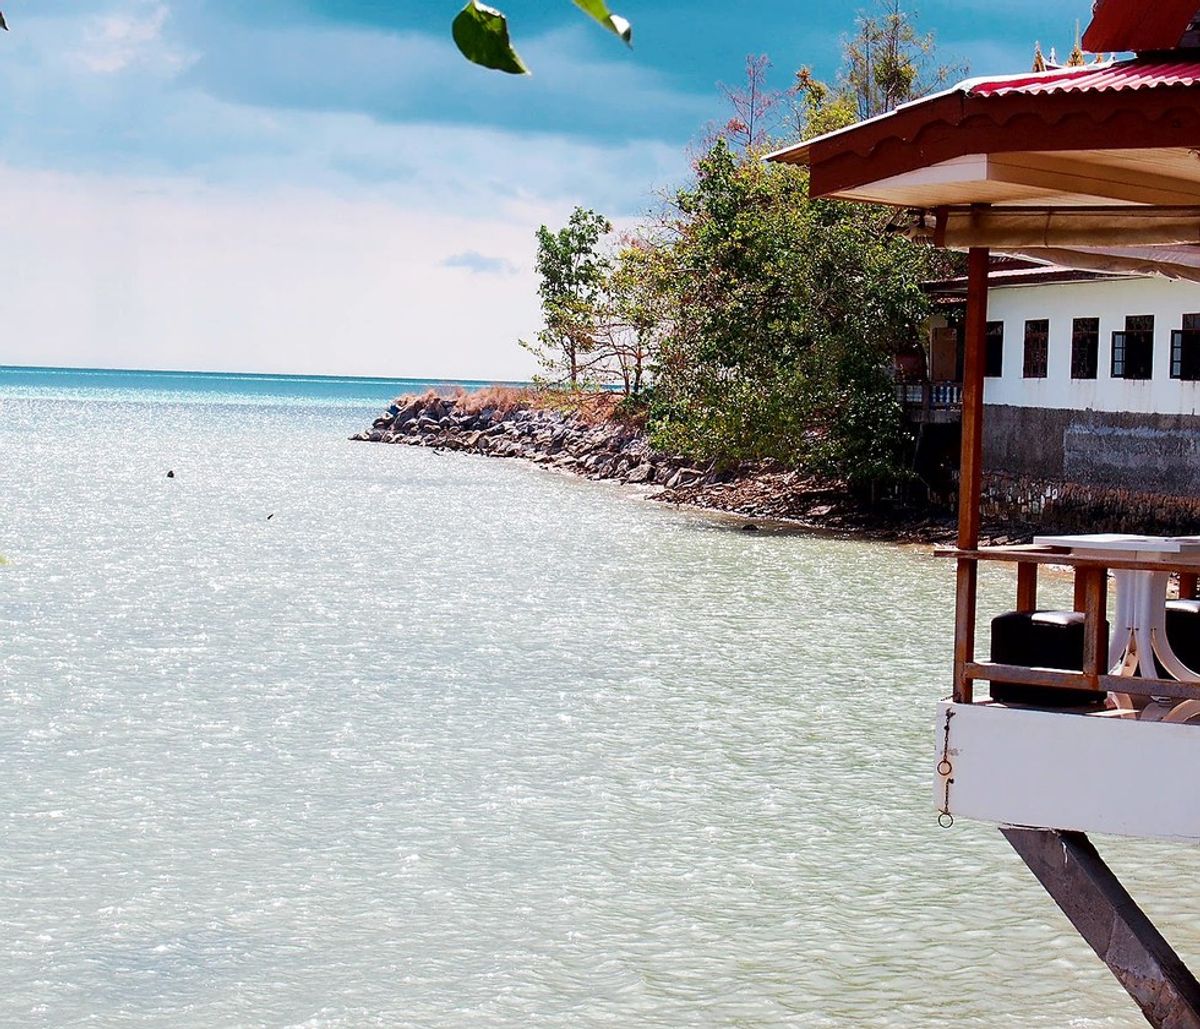 5 Places To Visit in Koh Samui